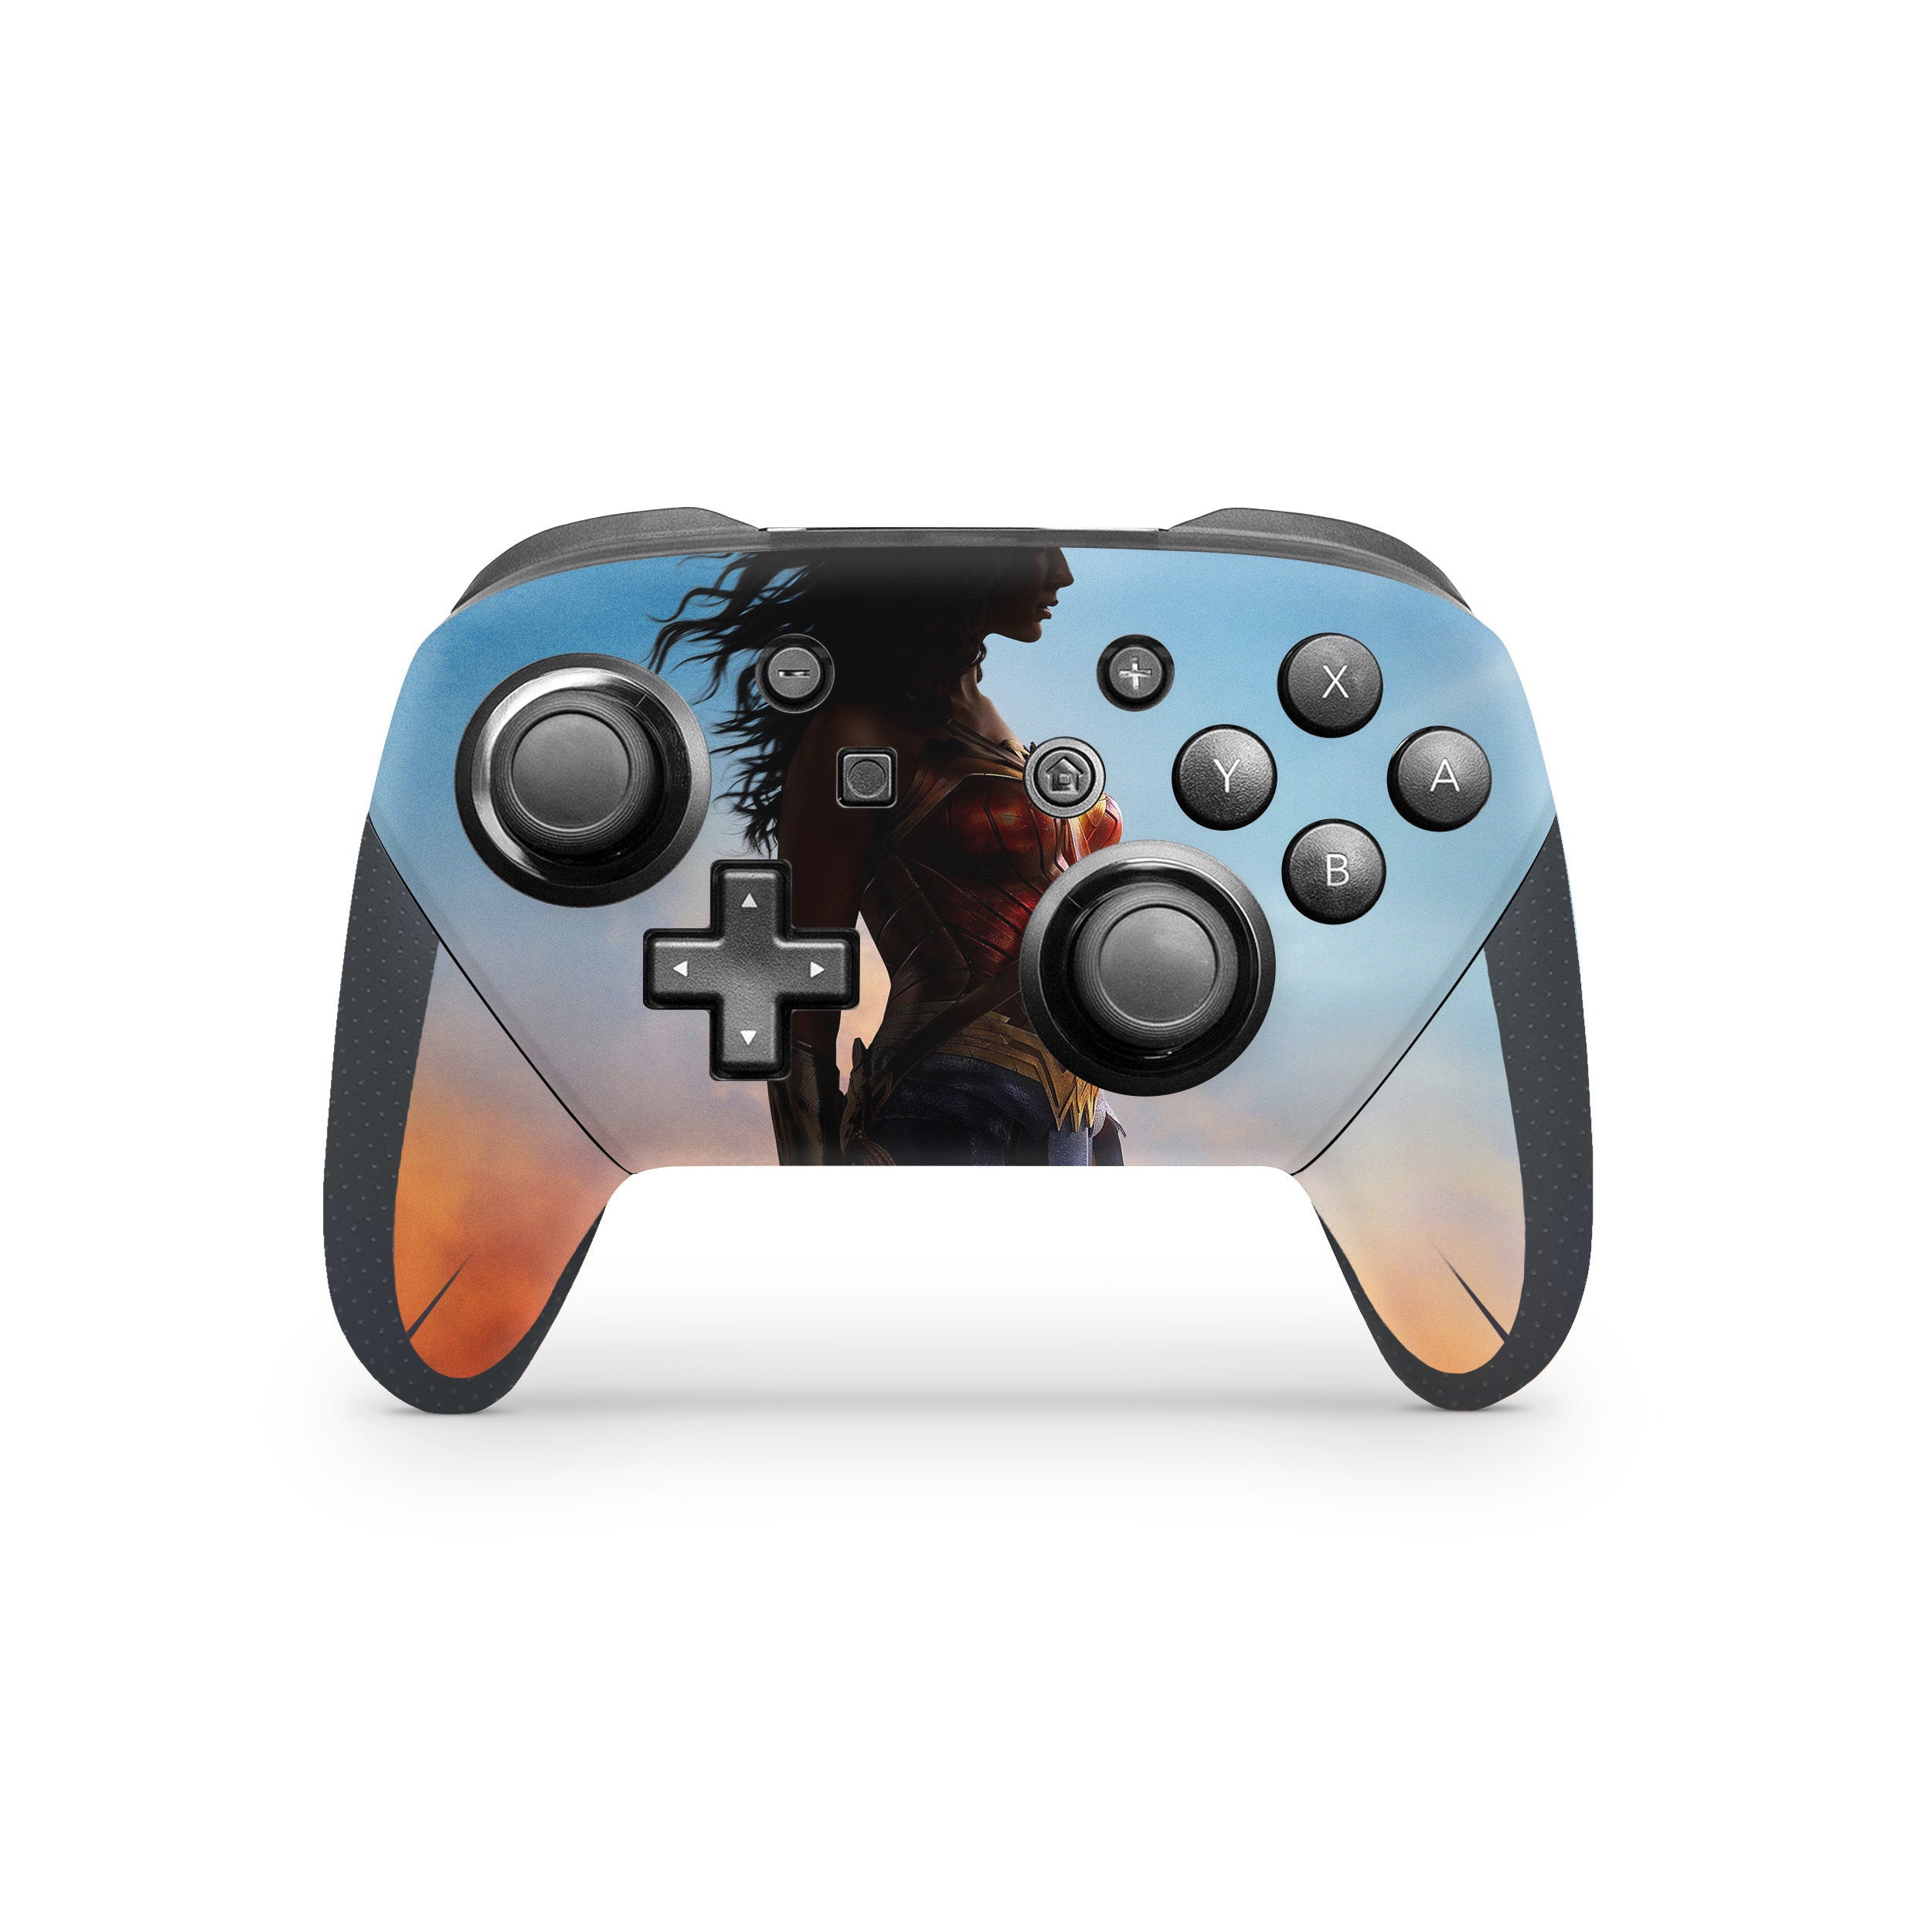 A video game skin featuring a DC Wonder Woman design for the Switch Pro Controller.